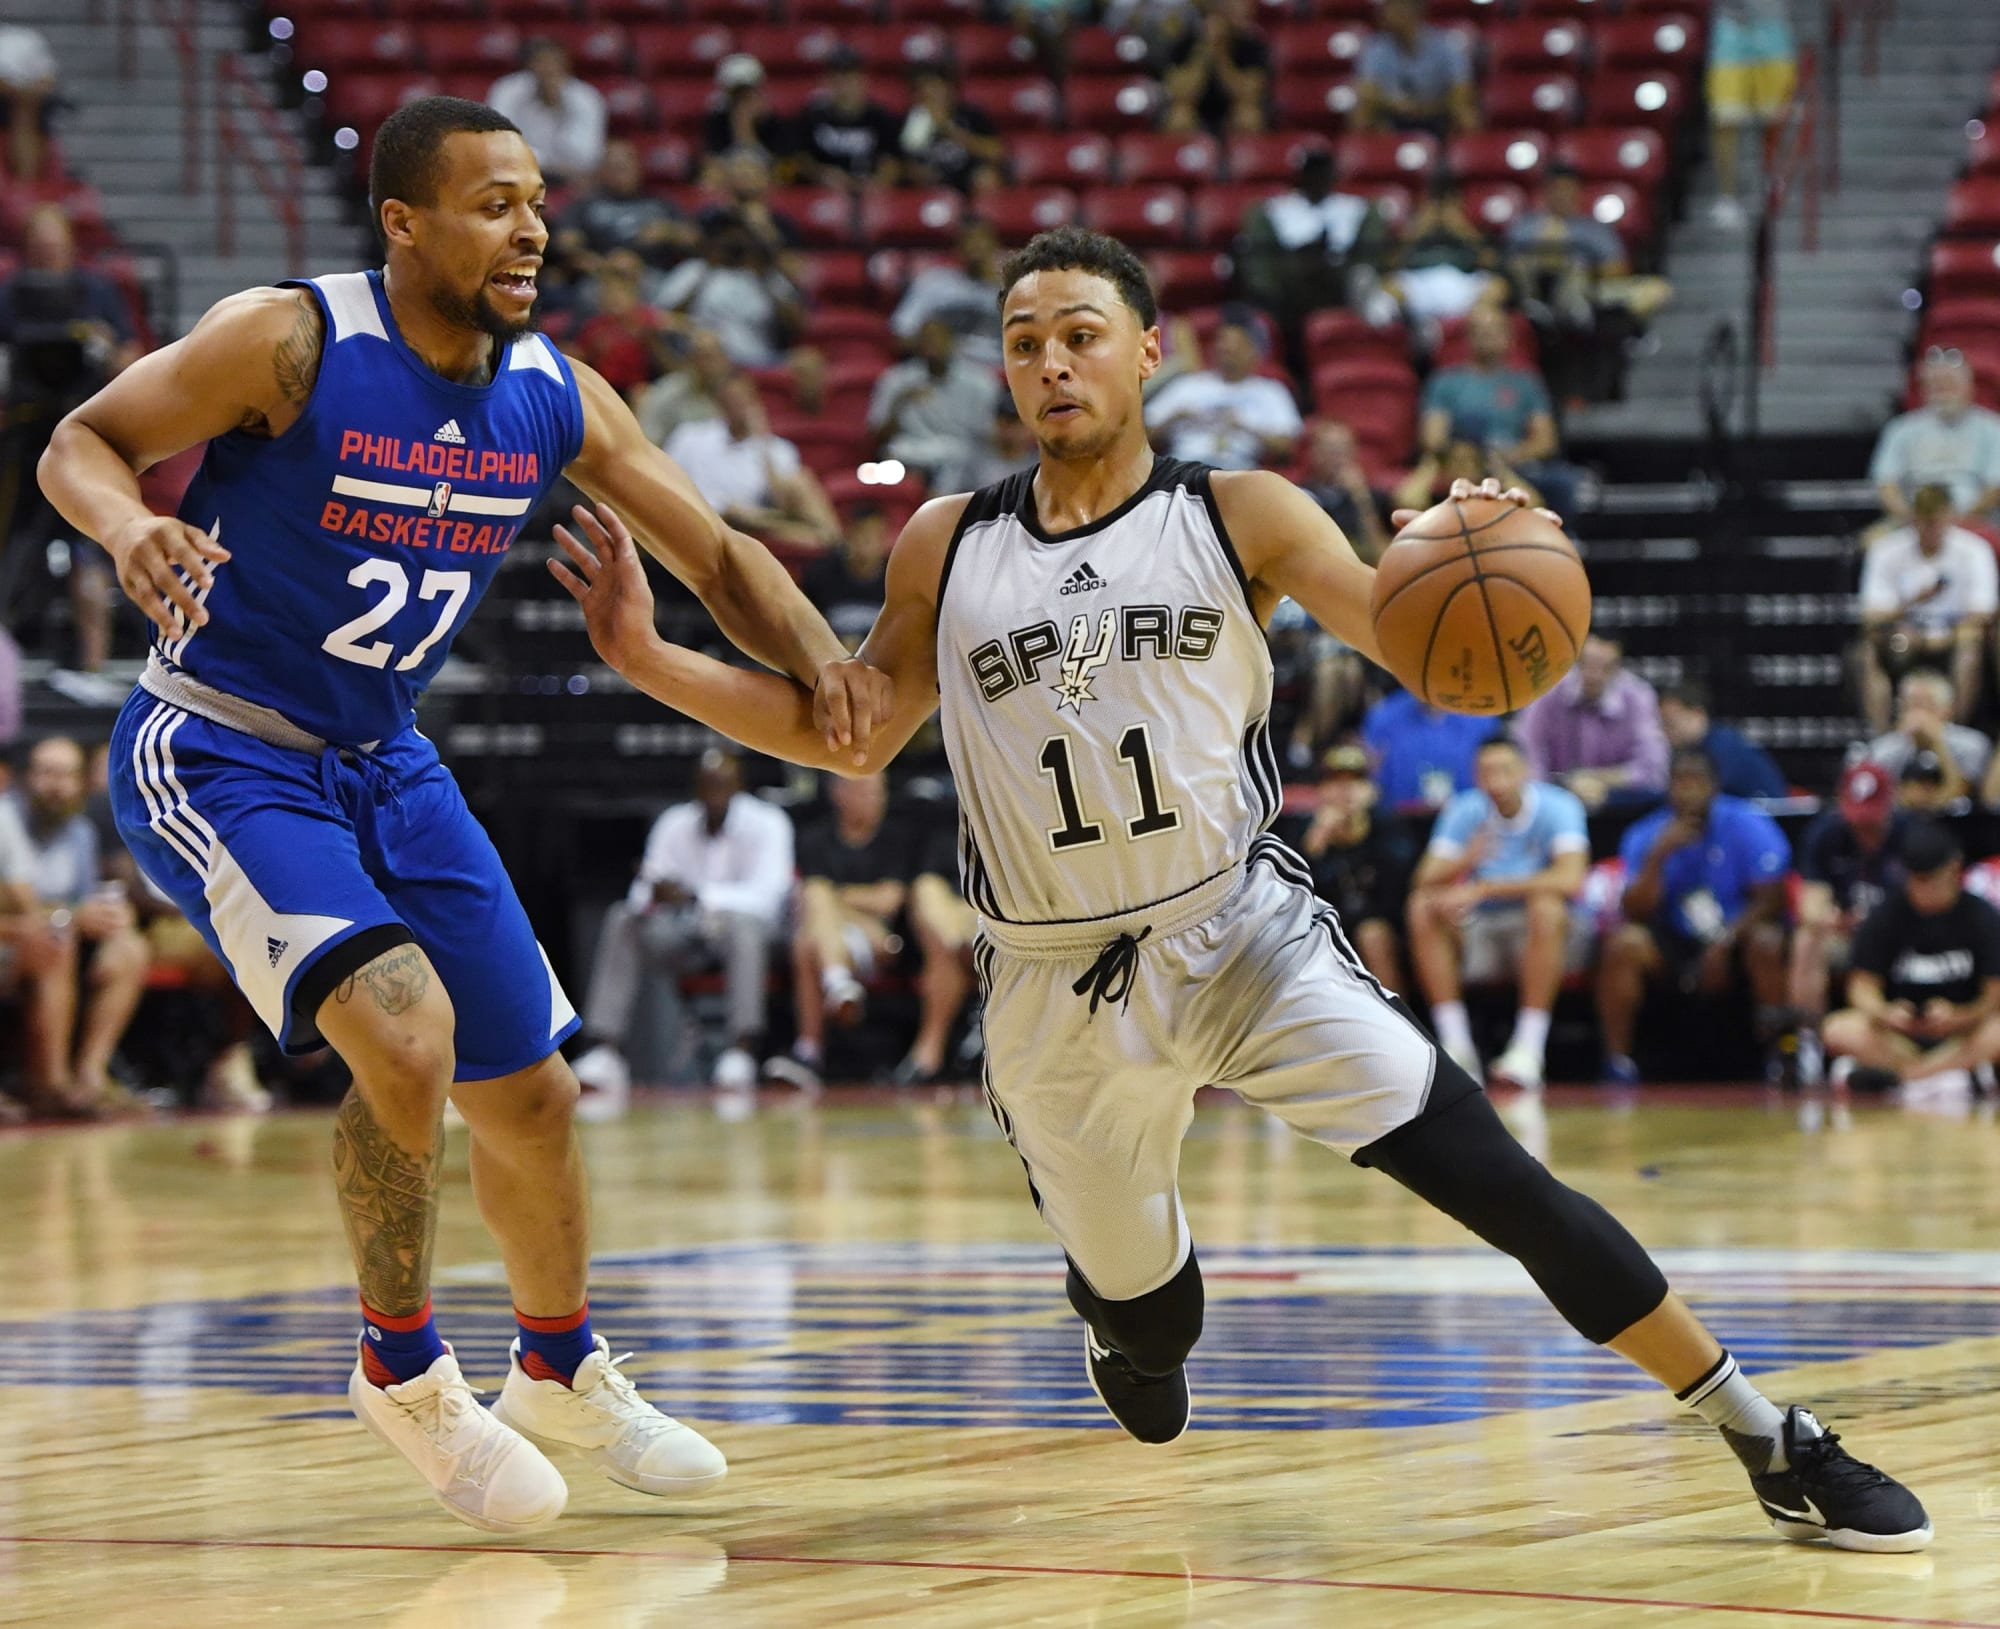 Michigan State Basketball: Bryn Forbes drops 35 again in Summer League